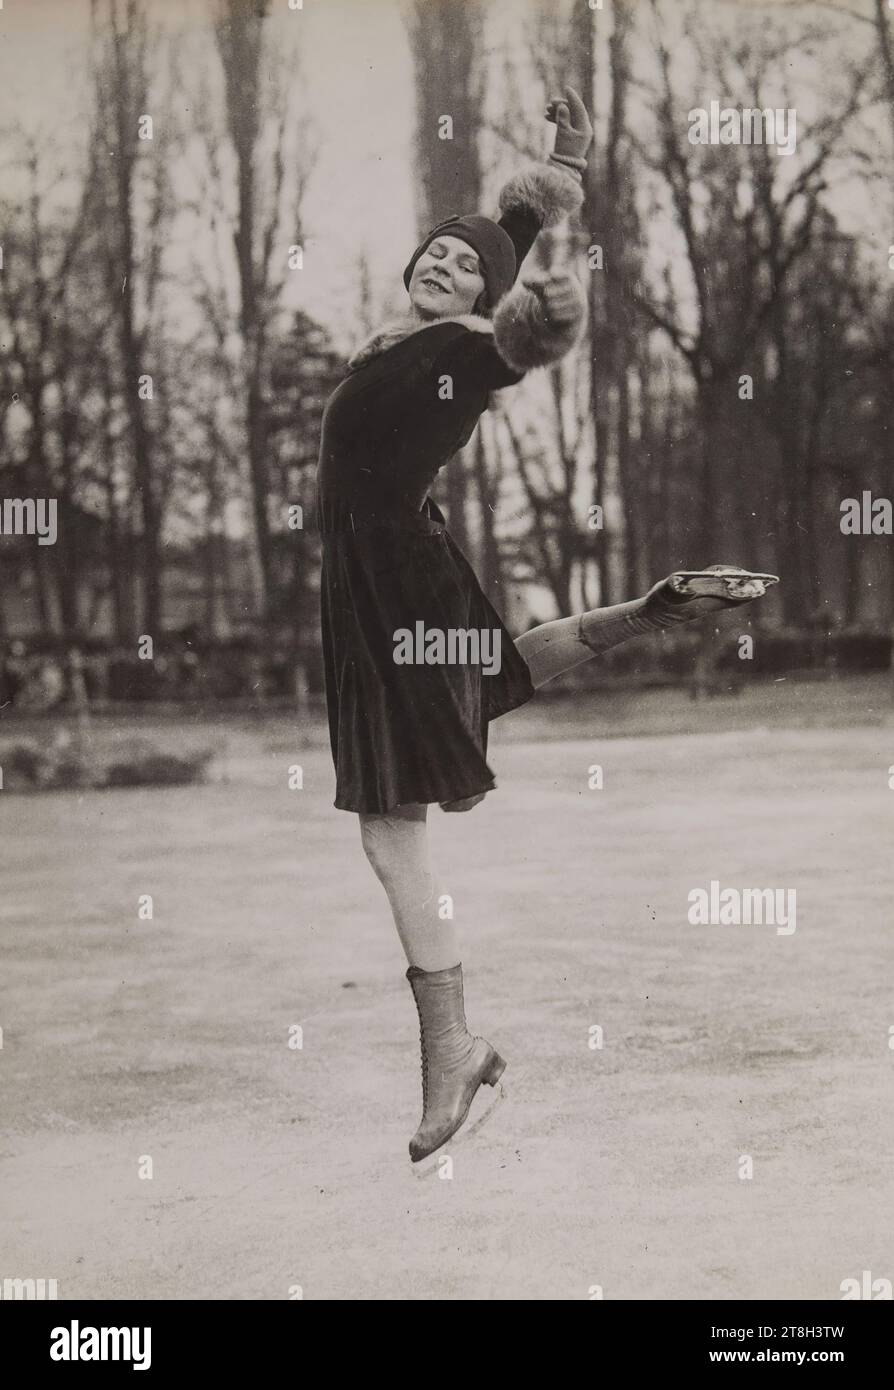 Mademoiselle Barbey in a figure skating contest on Lake Saint-Mandé, Agence Rol G. Devred, Photographer, En 16-2-1929, Photography, Graphic Arts, Photography, Gelatino silver bromide print, Dimensions - Work: Height: 17.9 cm, Width: 12.5 cm, Dimensions - Margin:, Height: 17.9 cm, Width: 13 cm Stock Photo